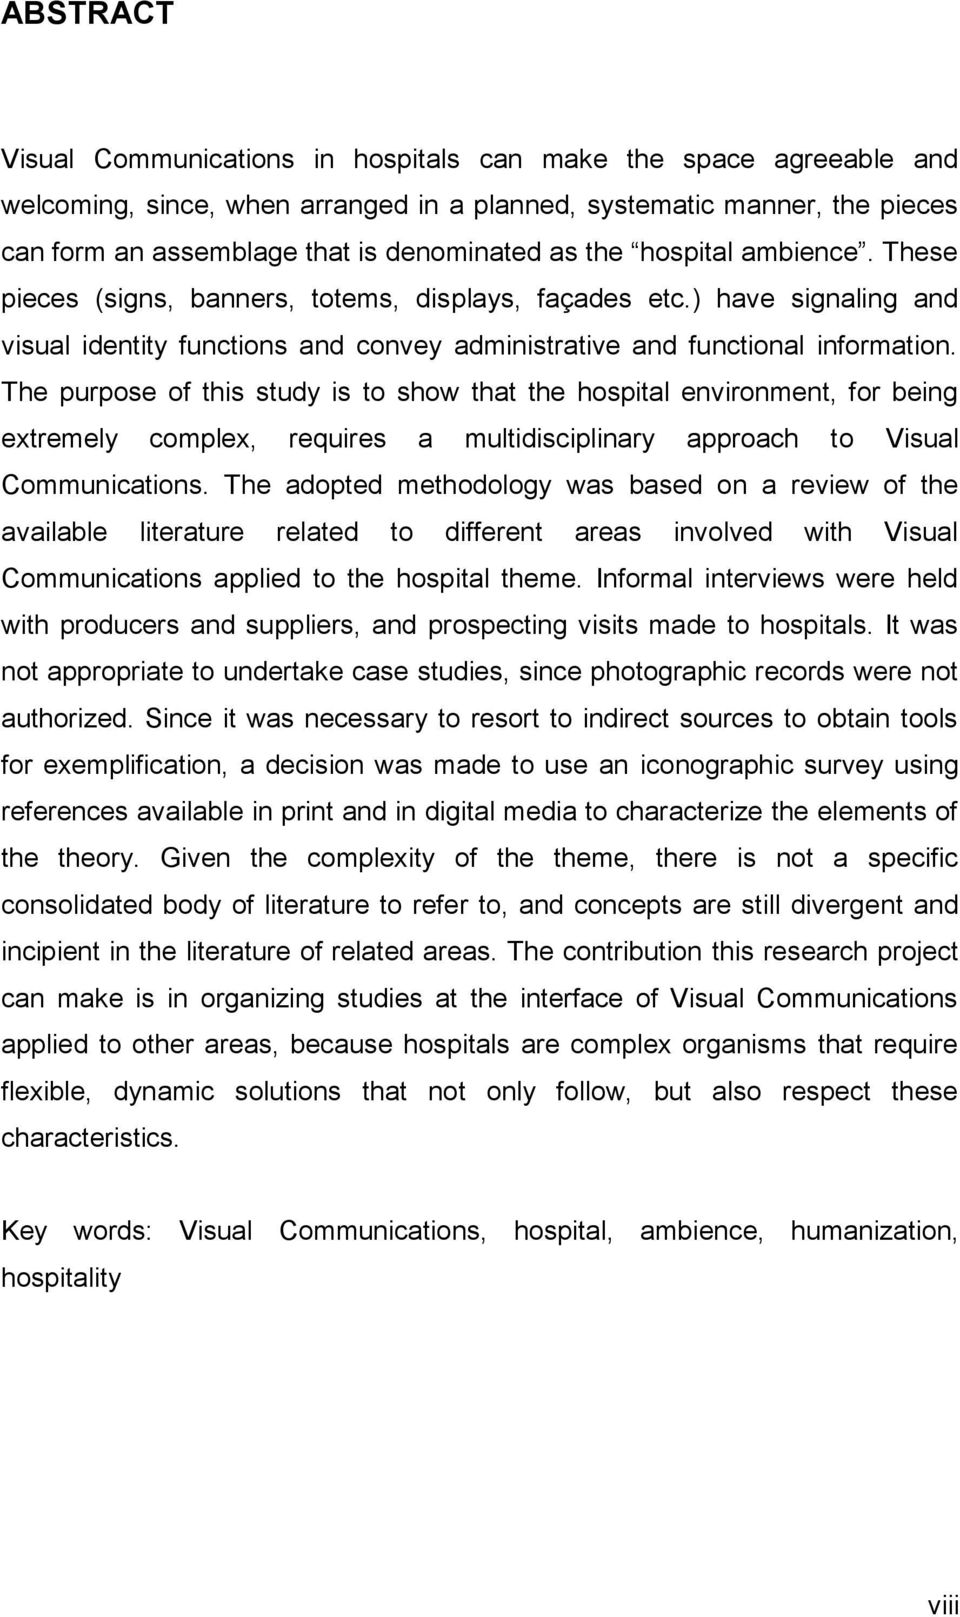 The purpose of this study is to show that the hospital environment, for being extremely complex, requires a multidisciplinary approach to Visual Communications.